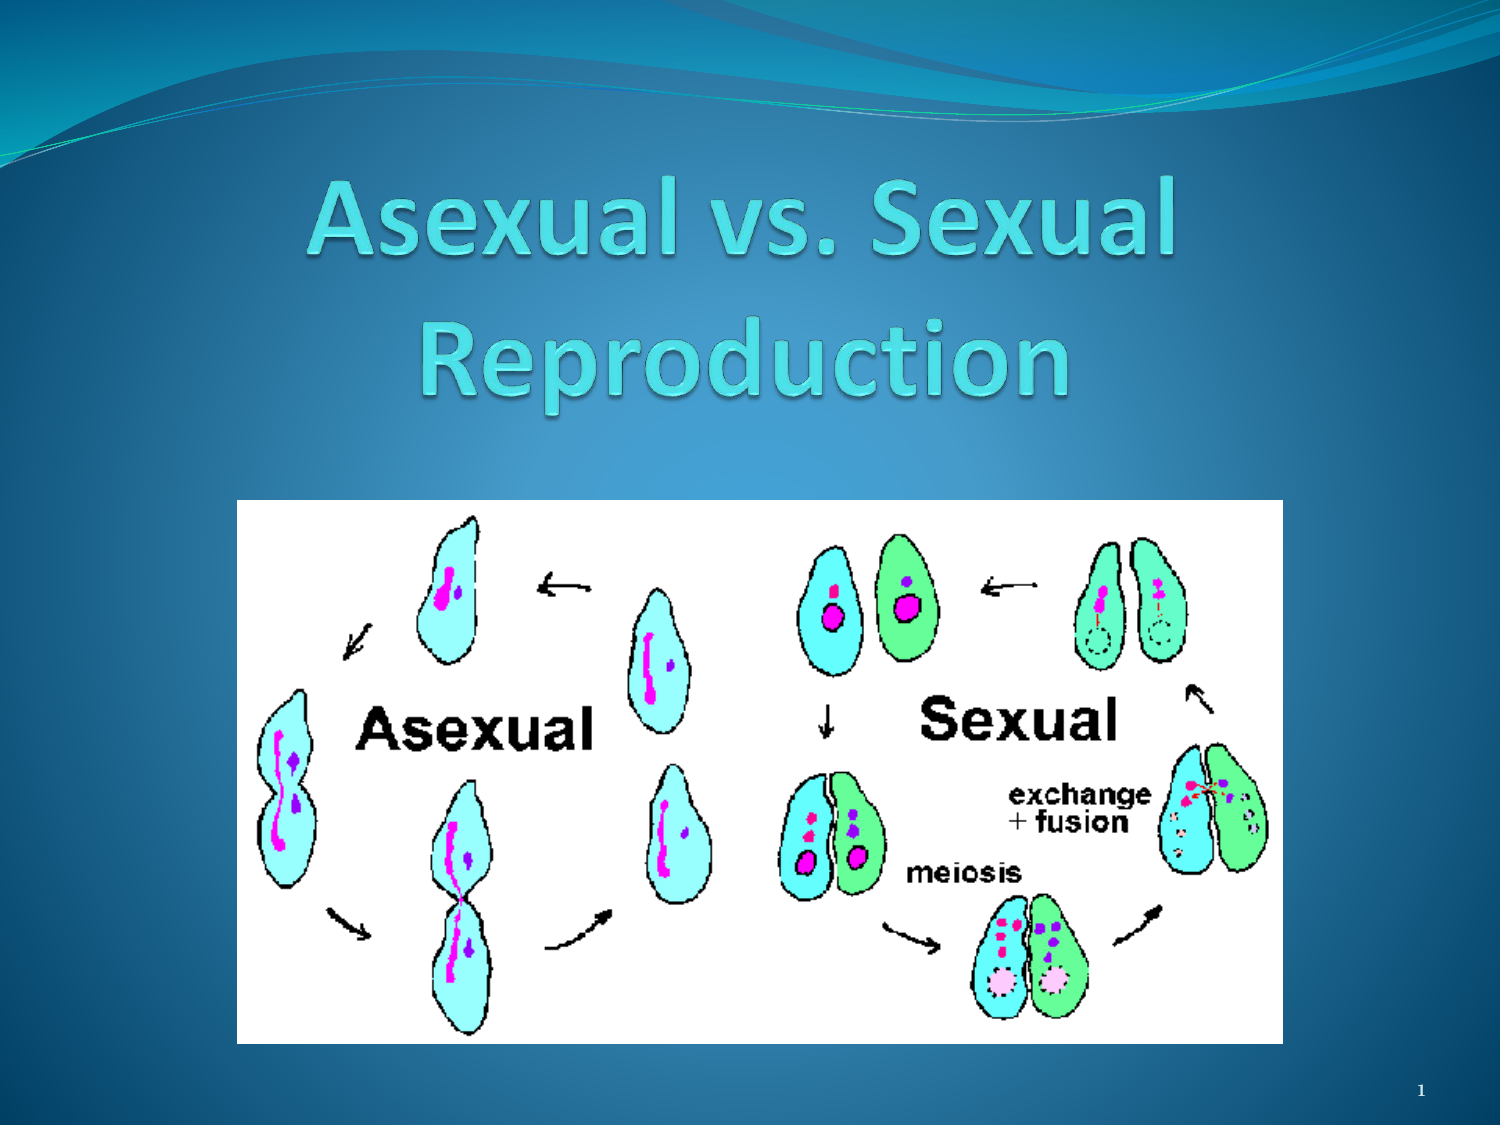 Explain 3 Ways Sexual And Asexual Reproduction Are Different